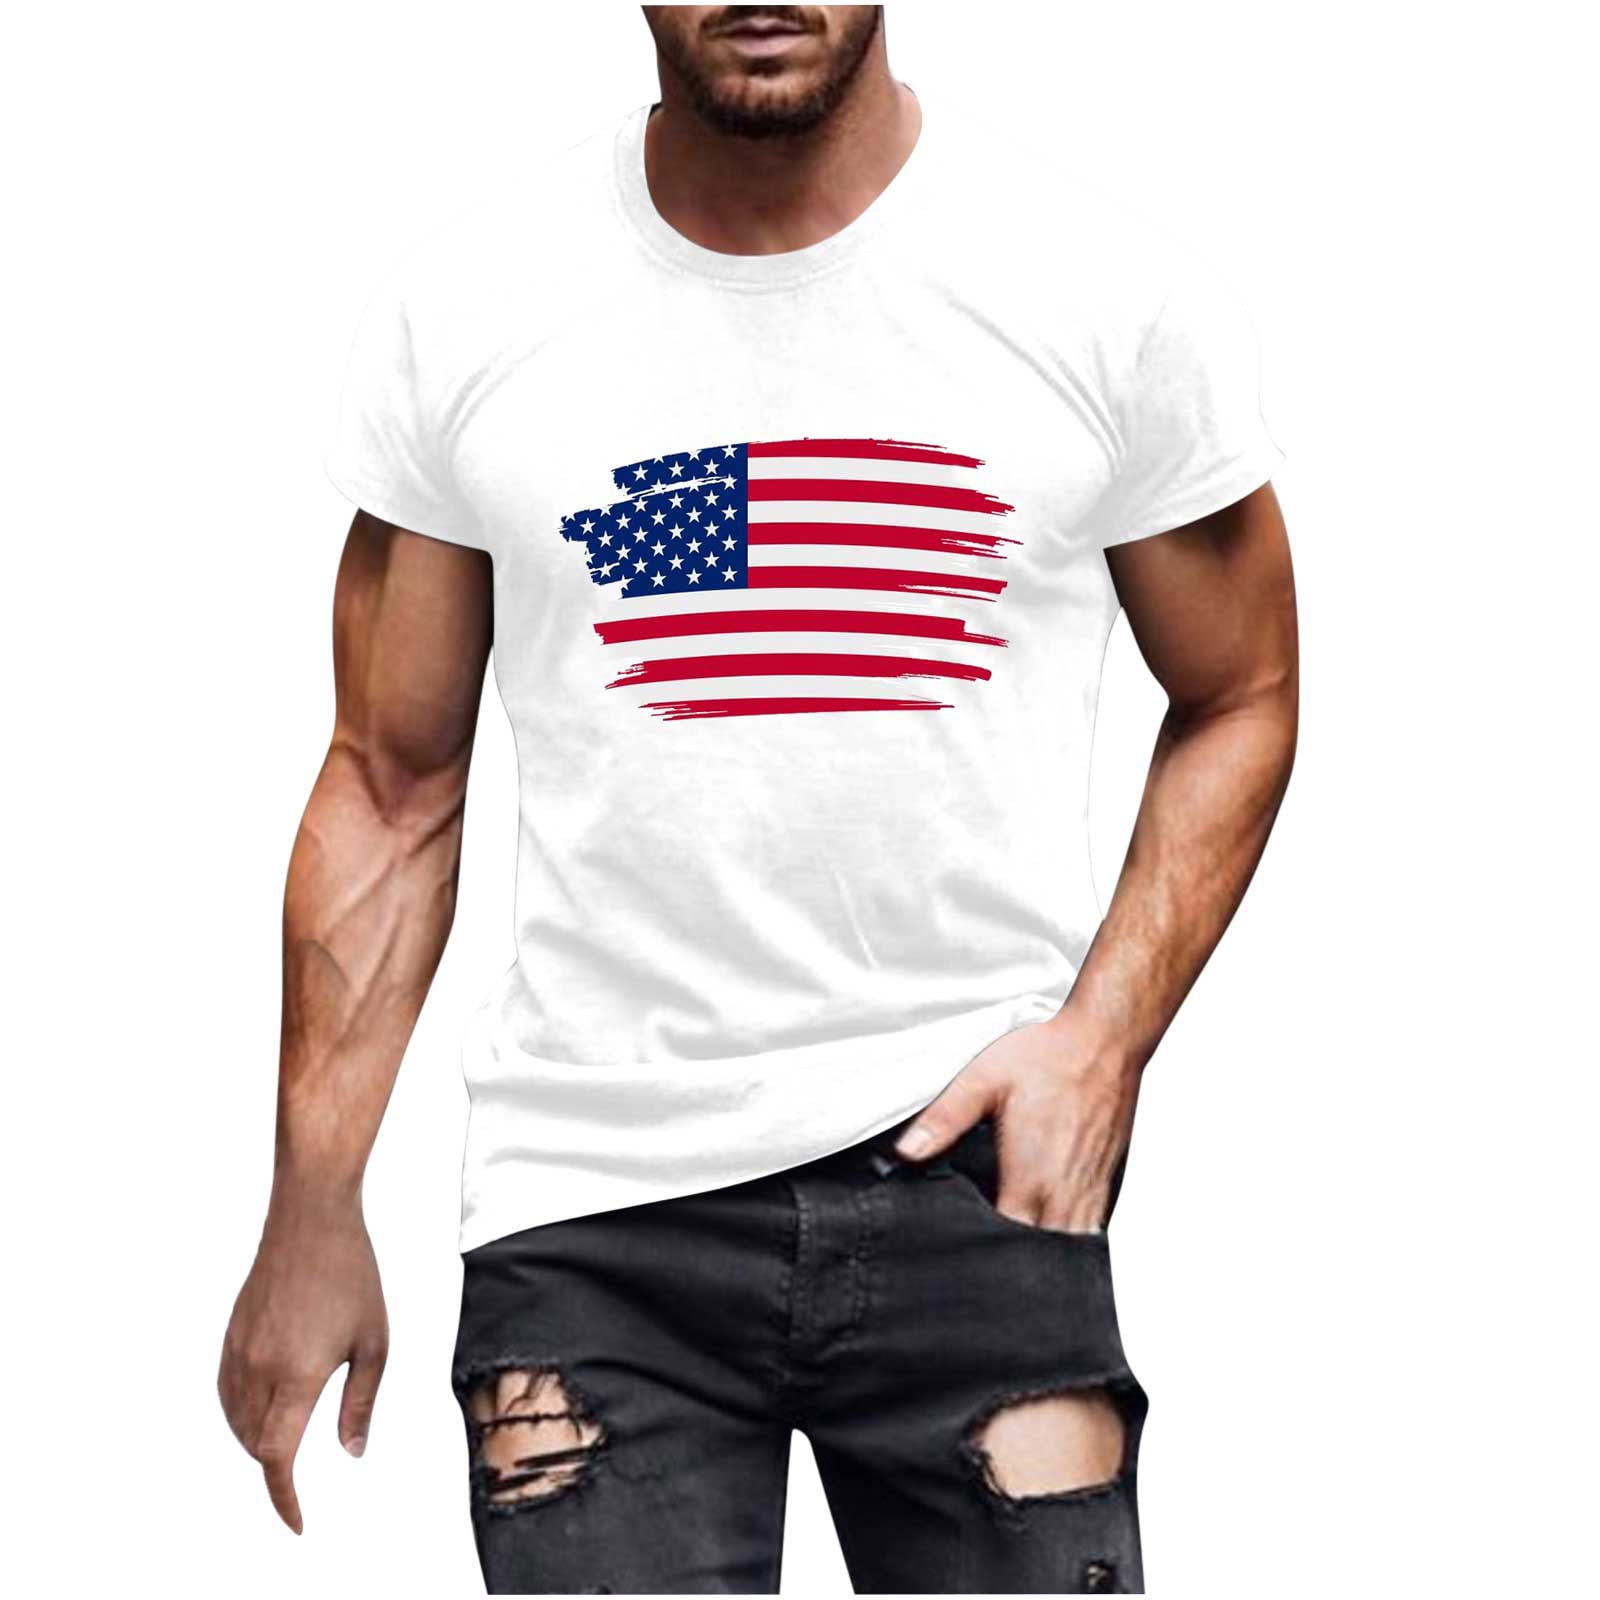 Ernkv Men's Cotton Fit Tops Clearance Short Sleeve Shirts Leisure Comfy Clothing Summer Holiday Round Neck Pullover Flag Tees Fashion White L - Walmart.com